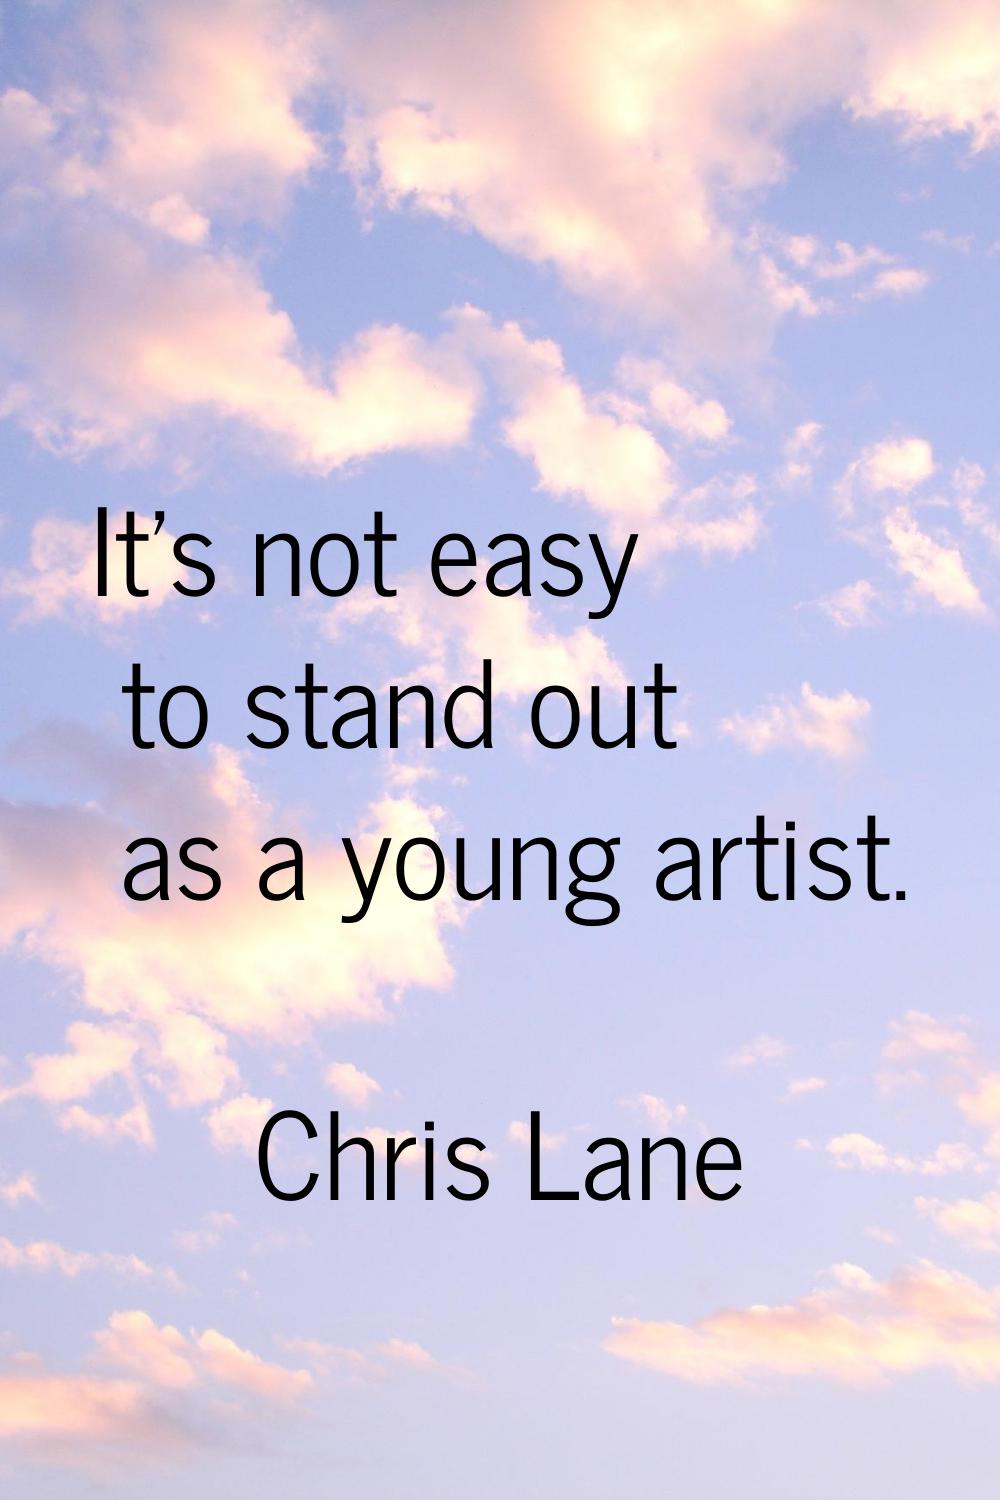 It's not easy to stand out as a young artist.